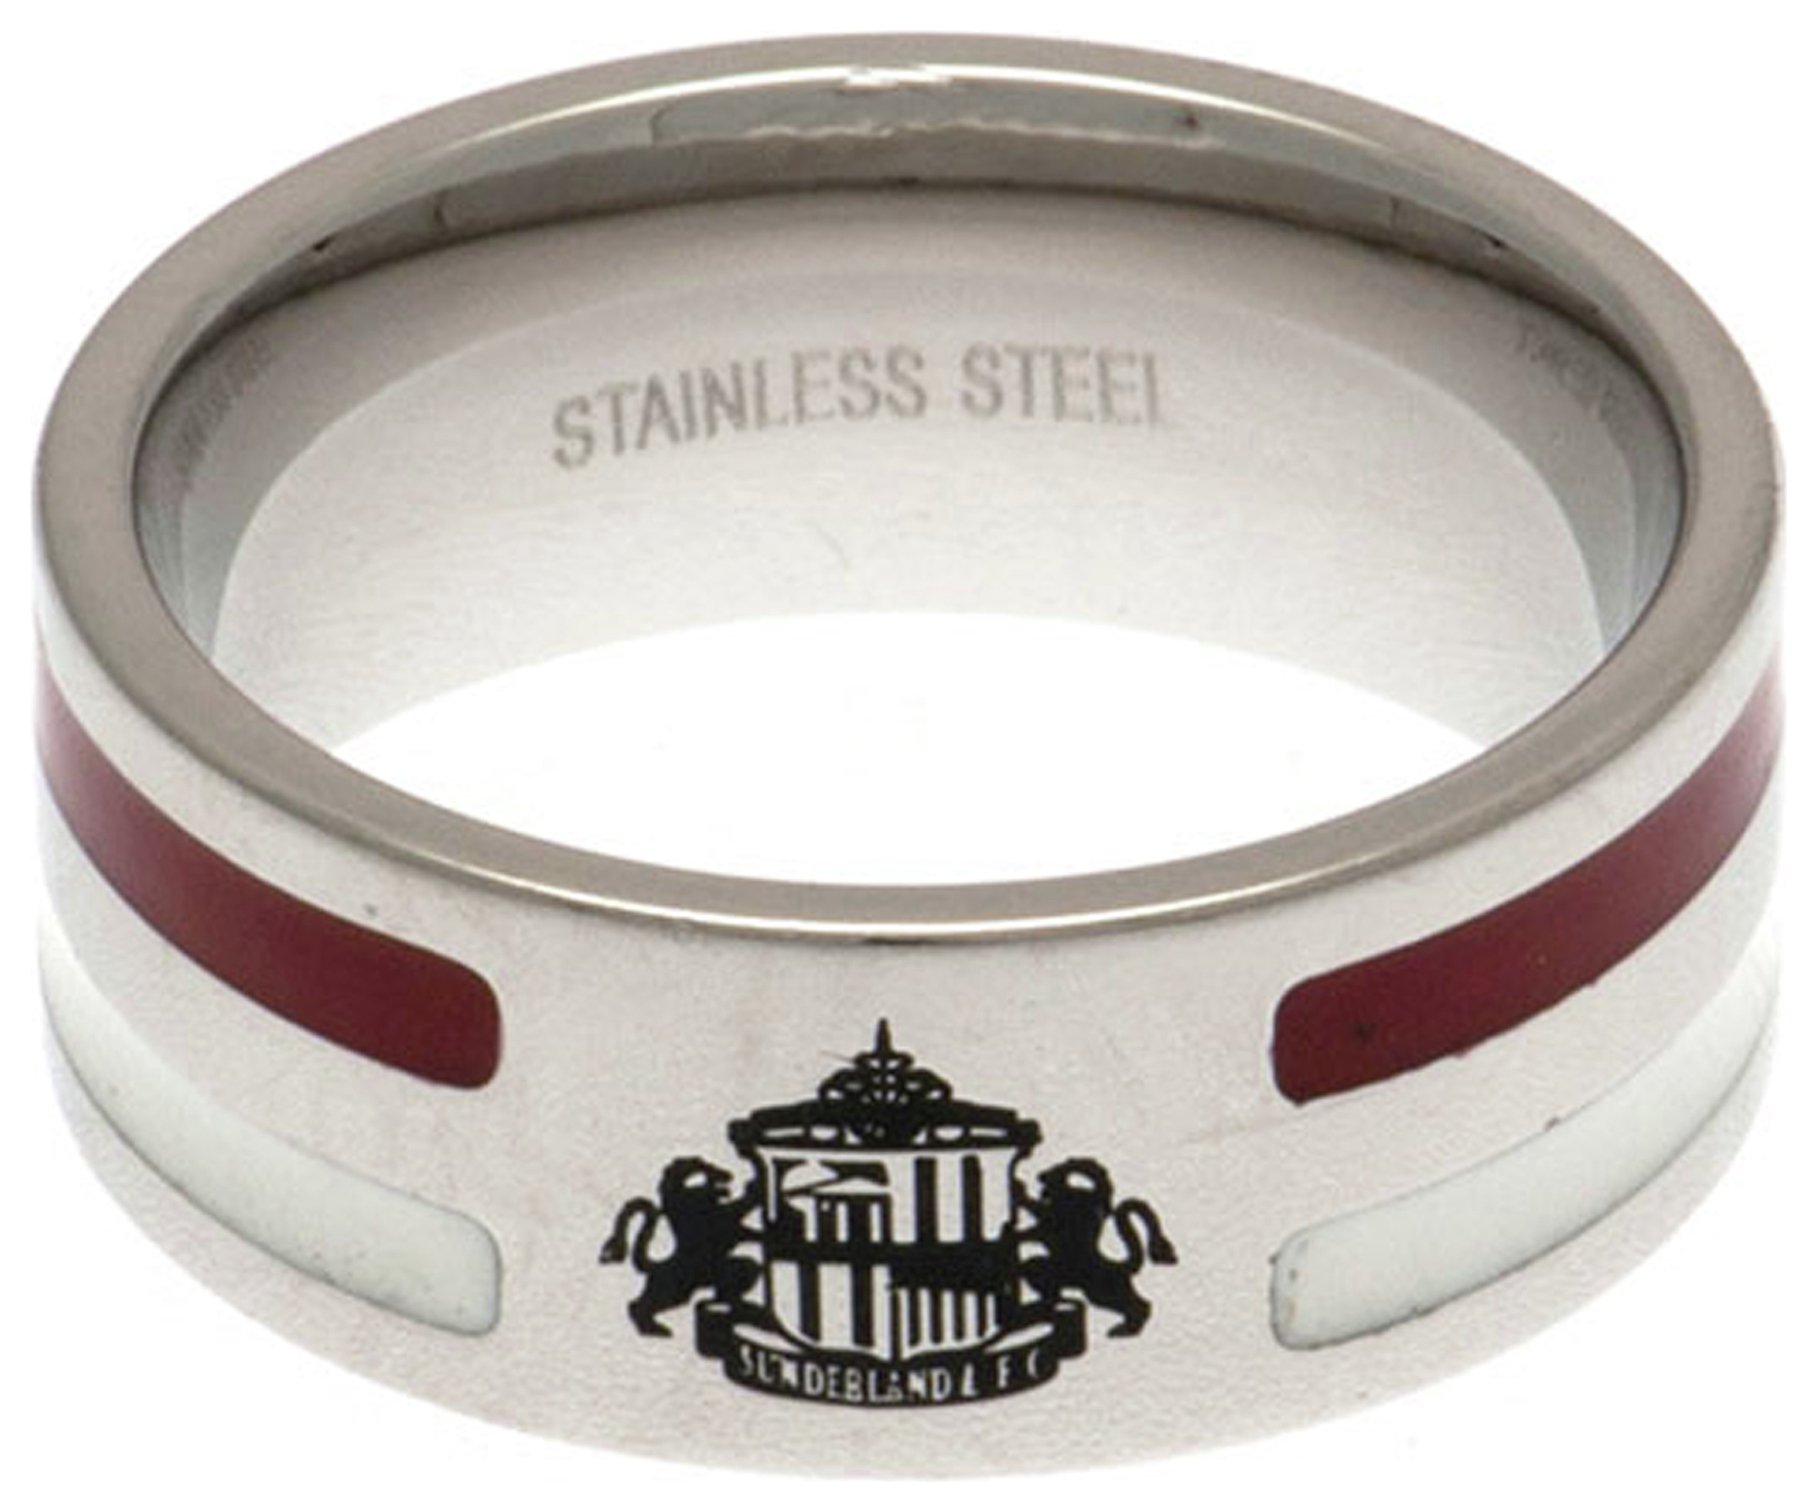 Stainless Steel Sunderland Striped Ring - Size R